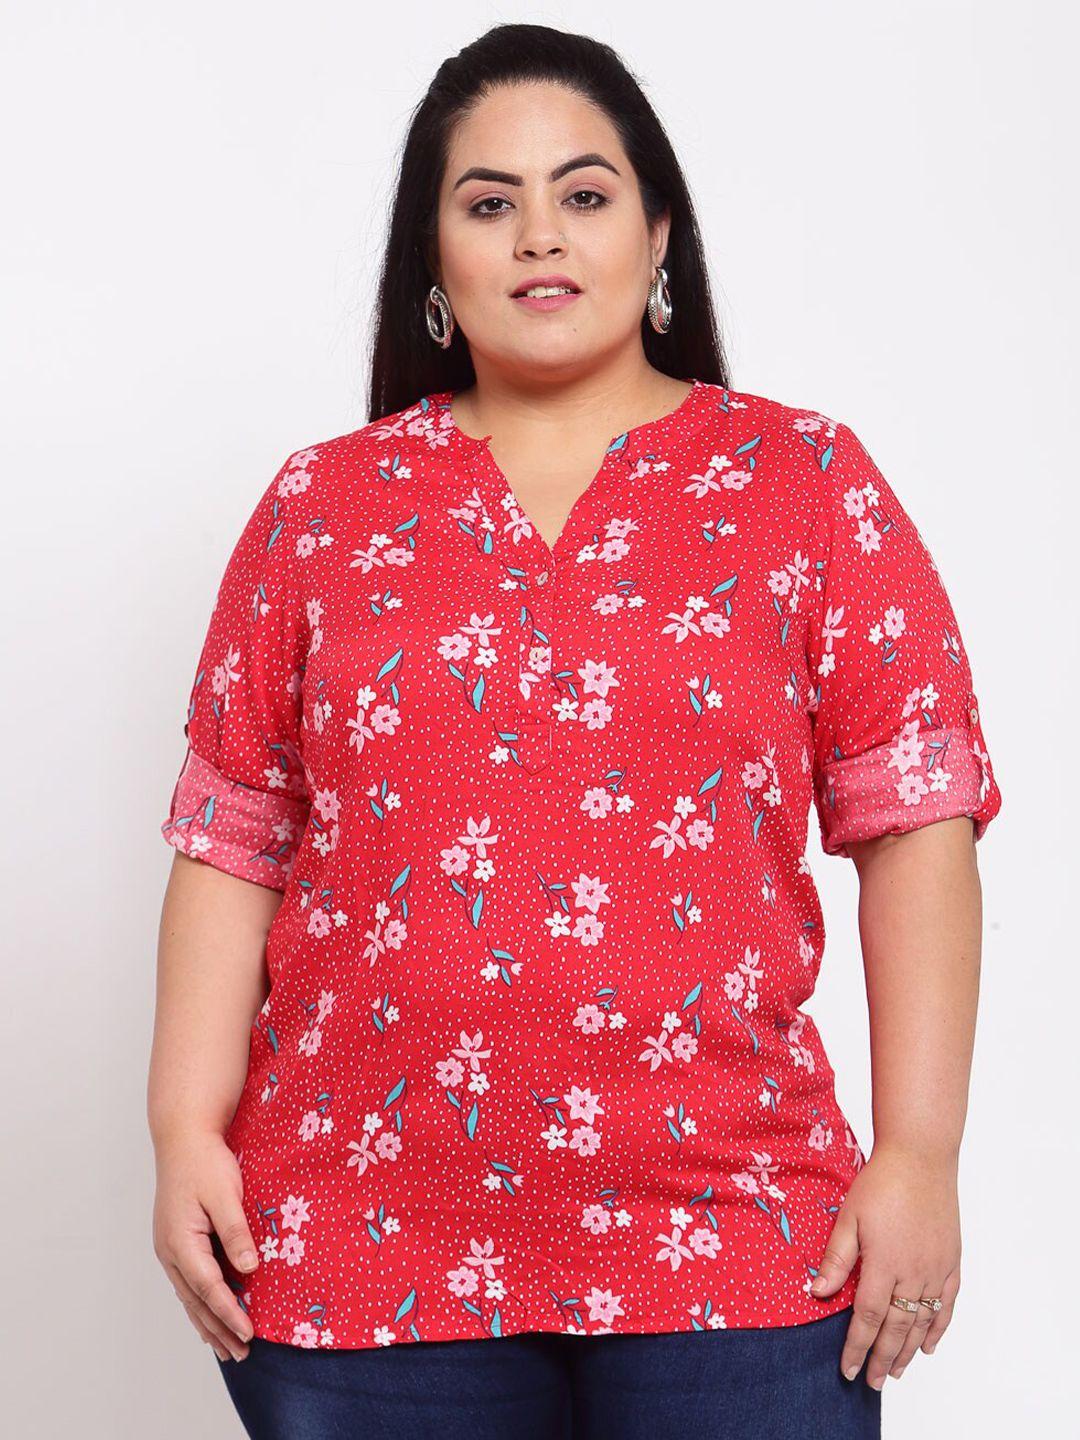 pluss red floral shirt style top